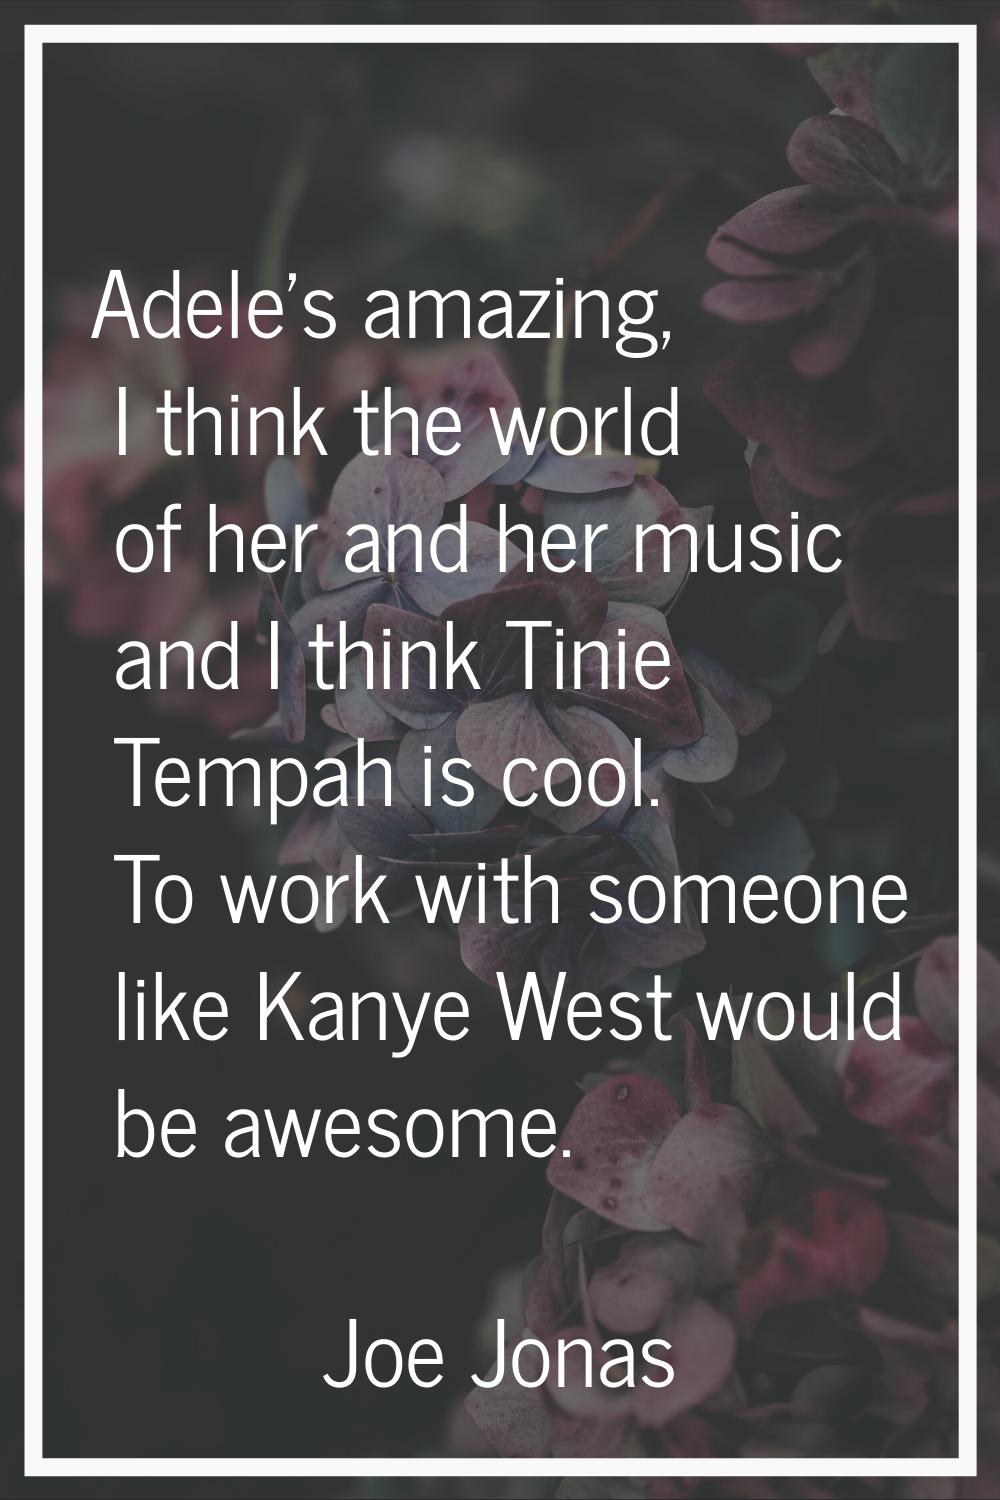 Adele's amazing, I think the world of her and her music and I think Tinie Tempah is cool. To work w